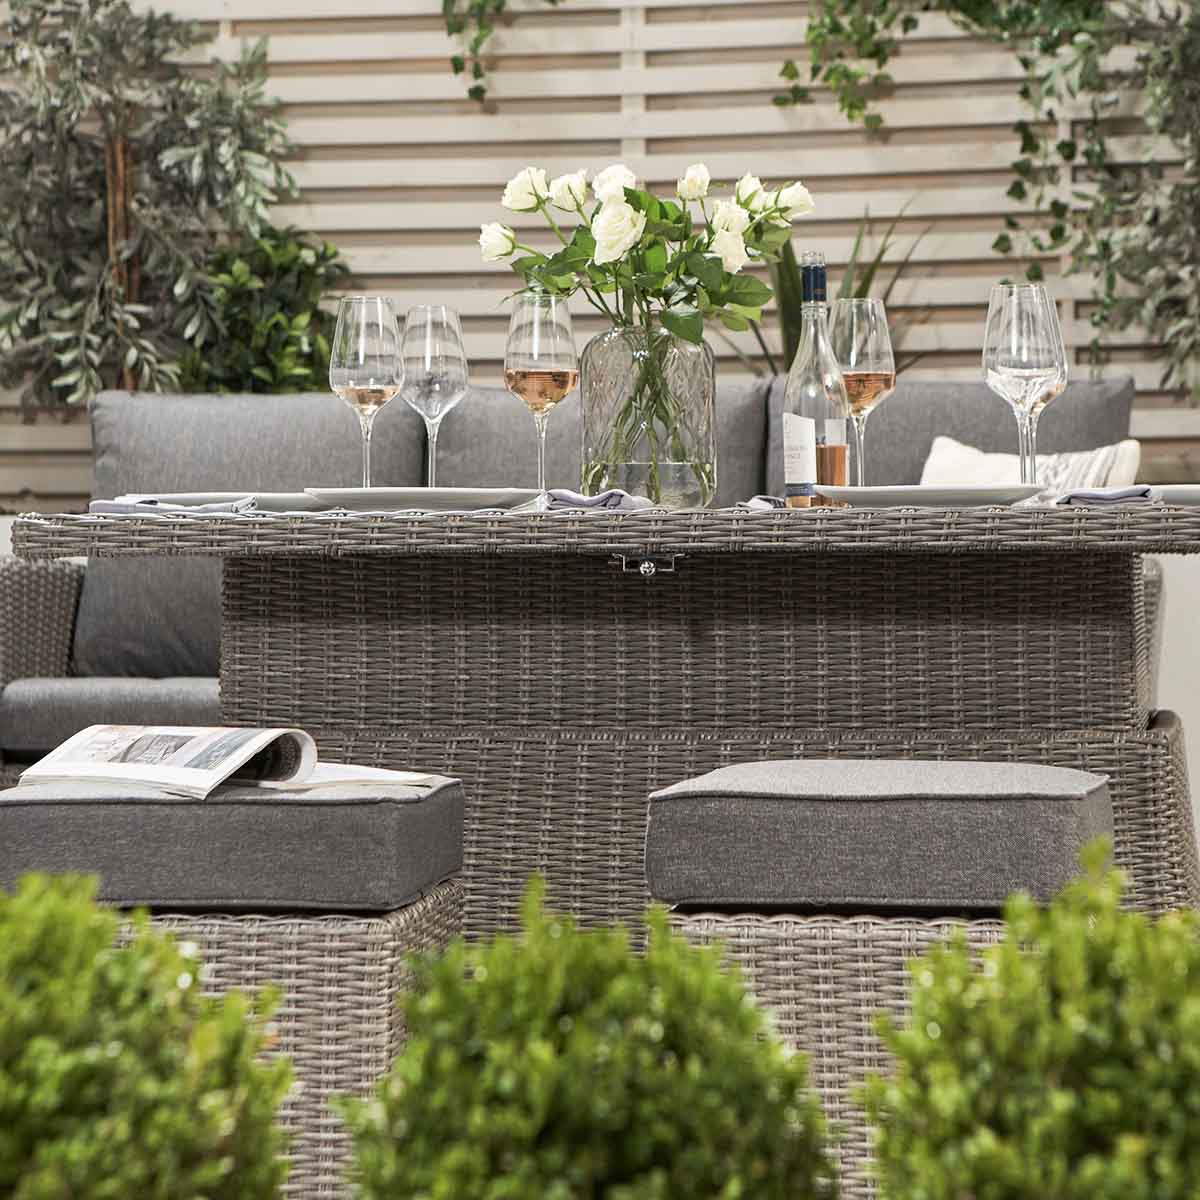 Borneo Grey Rattan Effect Garden Lounge Set with 3 Seater Sofa & Adjustable Ceramic Top Table – Click Style